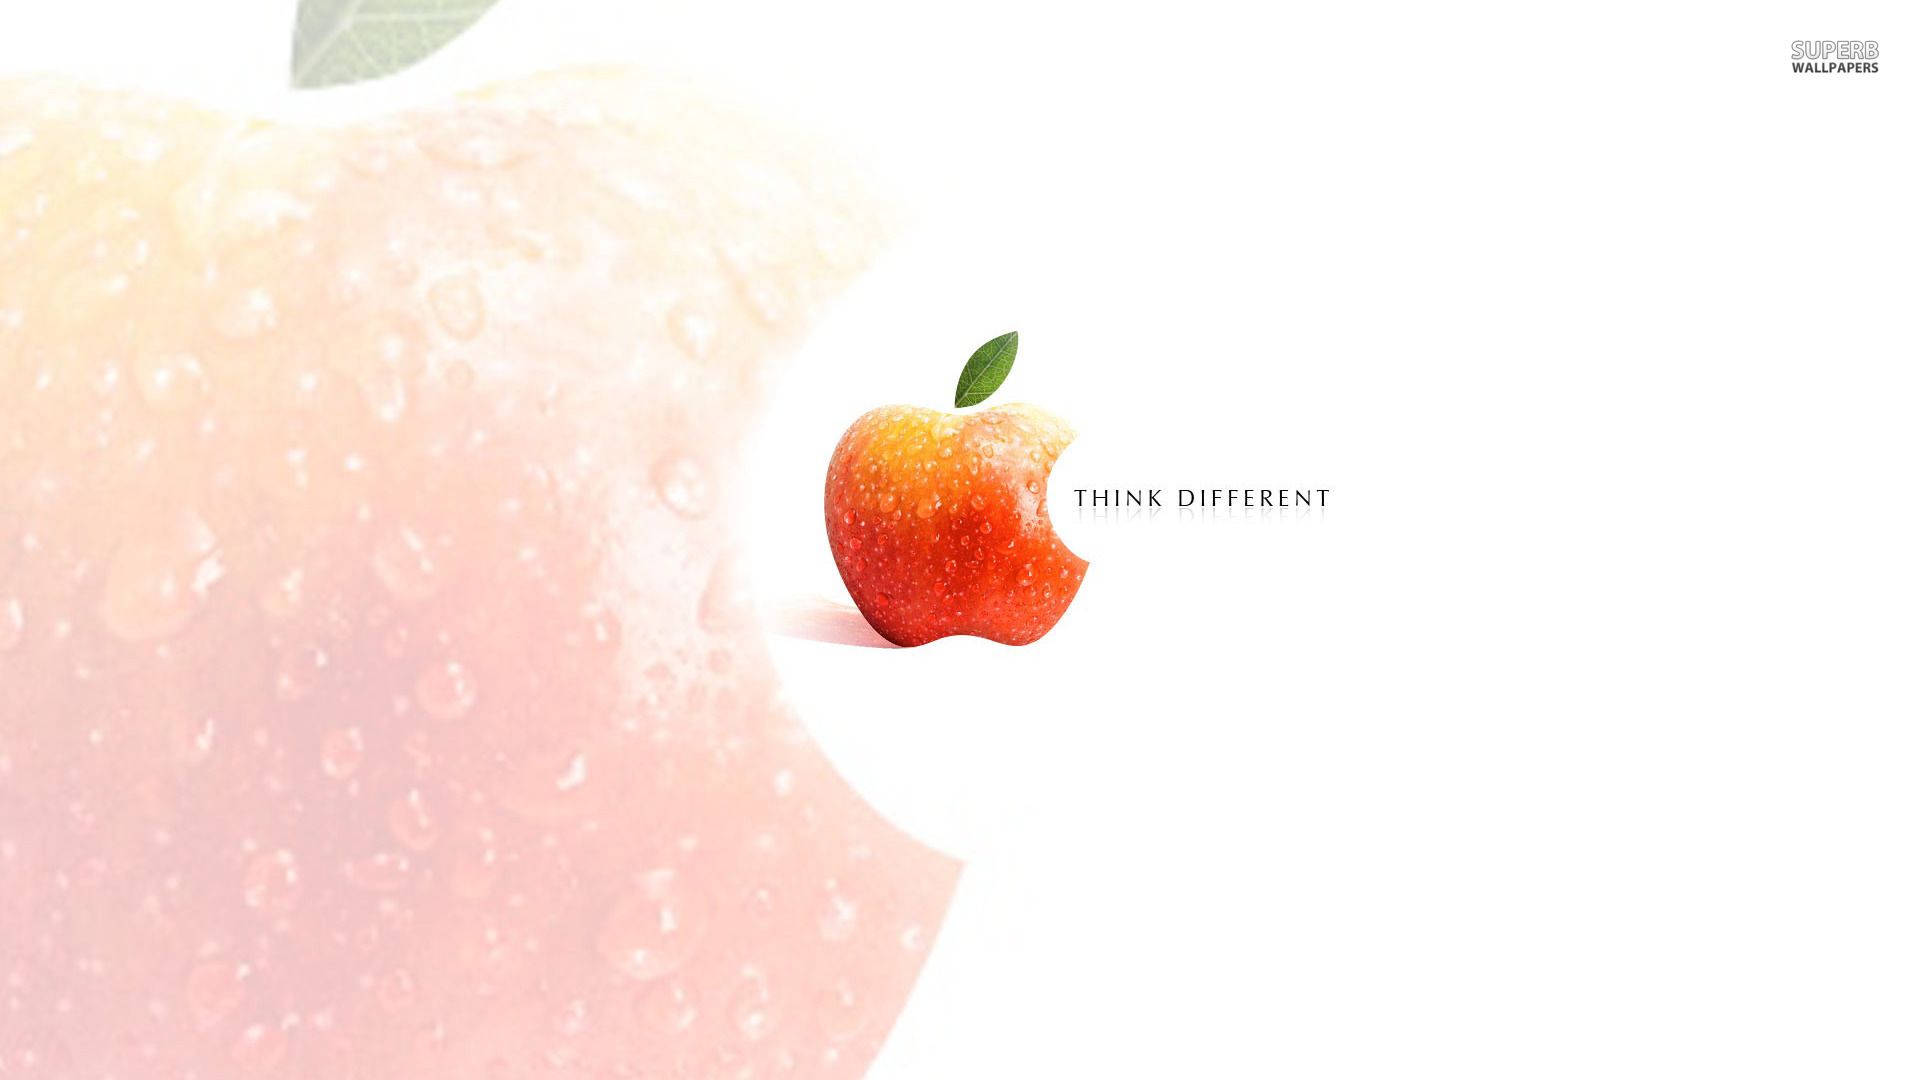 Apple - Think different wallpaper - Computer wallpapers -